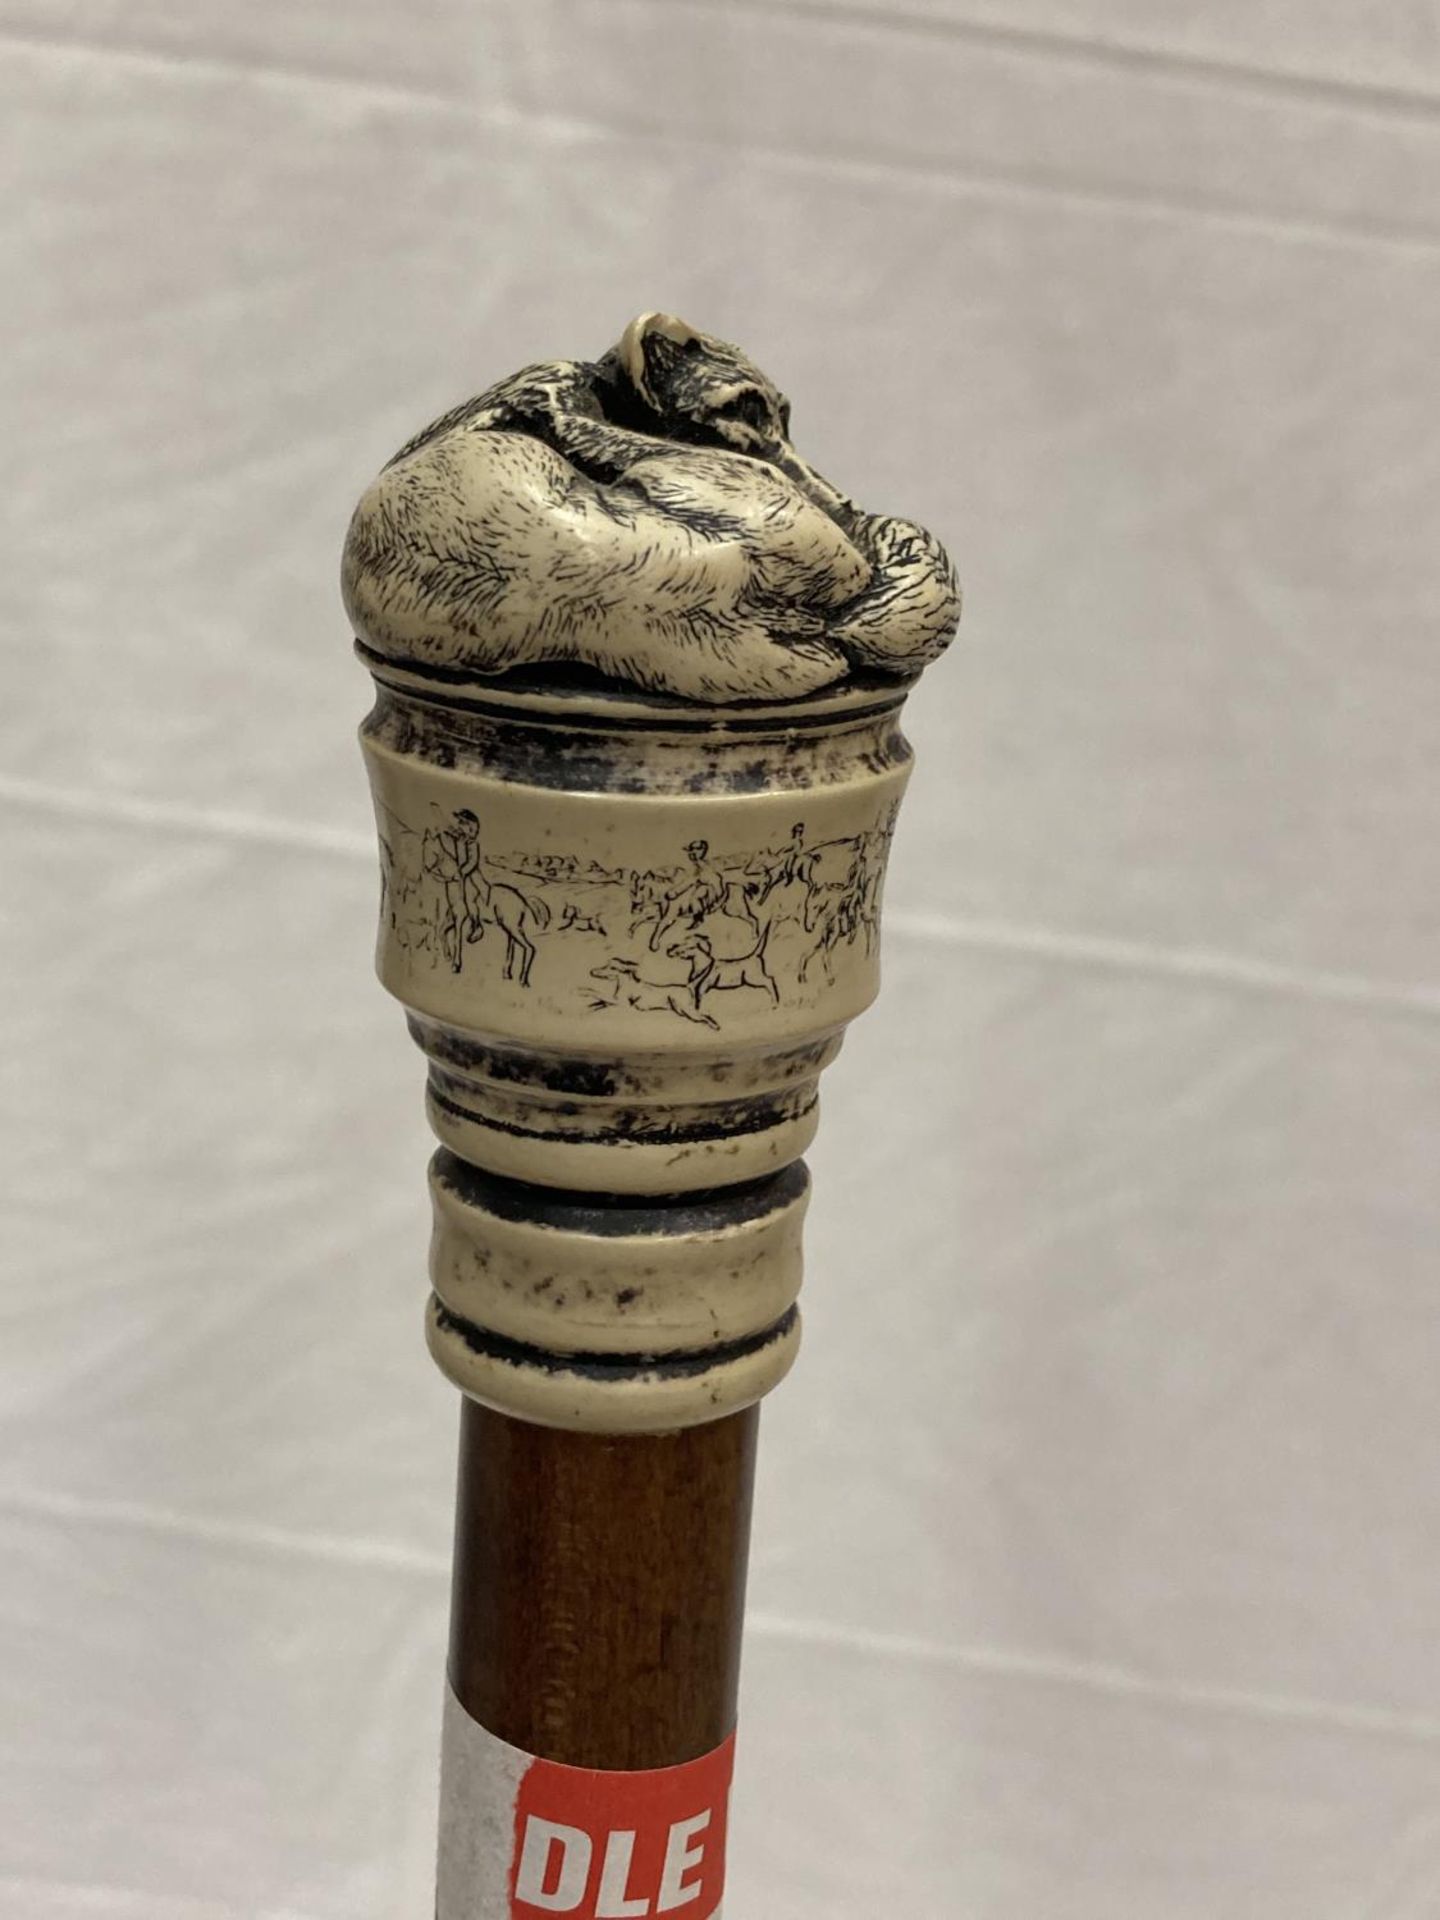 A WALKING CANE WITH A FOX FINIAL AND ENGRAVED HUNTING SCENE - Image 4 of 6